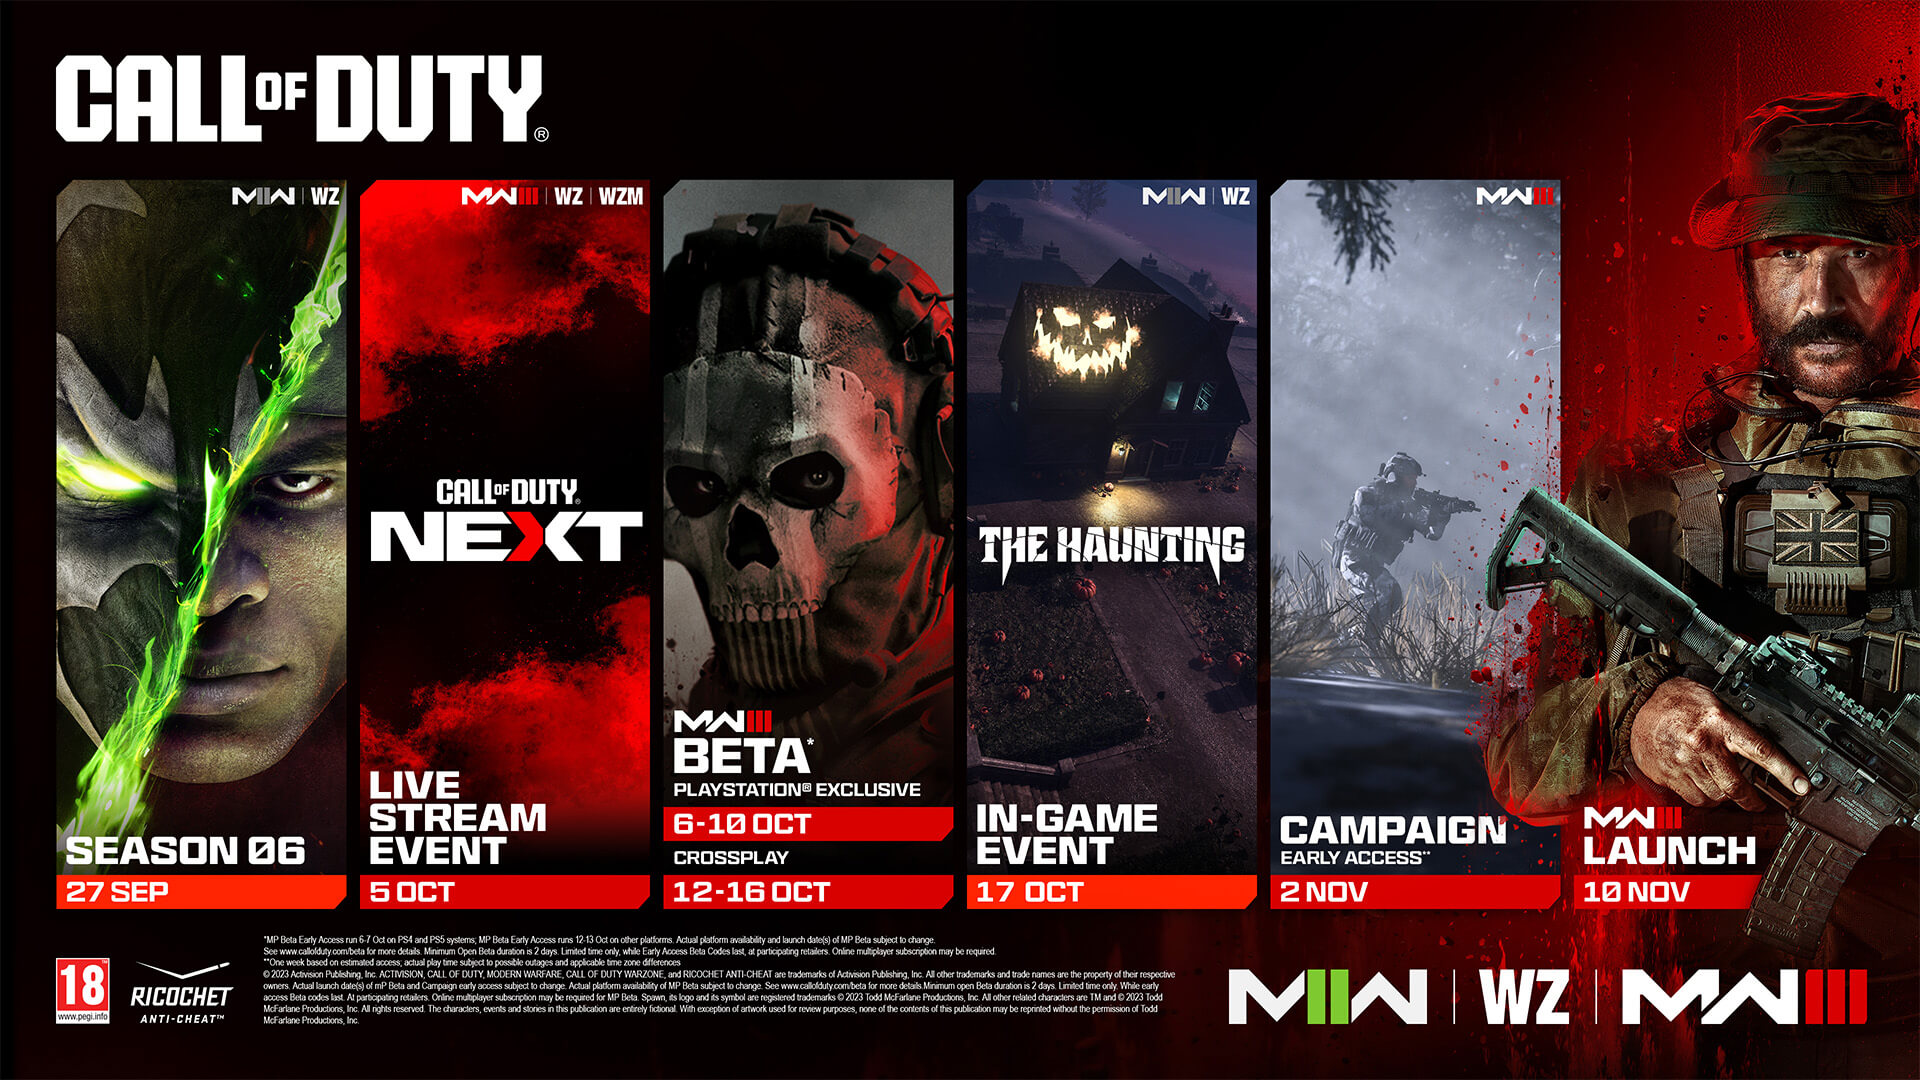 <p>CALL OF DUTY®. MWII | WZ. Al Simmons Spawn key art. SEASON 06. MWIII | WZ | WZM. Call of Duty NEXT key art. LIVE STREAM EVENT. OCT 5. MWIII. BETA*. Playstation Exclusive. OCT 6 - 10. Crossplays. OCT 12 - 16. MWII | WZ. The Haunting. In-Game Event. OCT 17. MWIII. Campaign Early Access. NOV 2. MWIII. Launch. NOV 10. Warzone logo. Modern Warfare II logo. Modern Warfare III logo. Ricochet logo. Ratings logo. © 2023 Activision Publishing, Inc. ACTIVISION, CALL OF DUTY, MODERN WARFARE, CALL OF DUTY WARZONE, and RICOCHET ANTI-CHEAT are trademarks of Activision Publishing, Inc. All other trademarks and trade names are the property of their respective owners. Actual launch date(s) of MP Beta and Campaign early access subject to change. Actual platform availability of MP Beta subject to change. See http://www.callofduty.com/beta for more details.Minimum open Beta duration is 2 days. Limited time only. While early access Beta codes last. At participating retailers. Online multiplayer subscription may be required for MP Beta. Spawn, its logo and its symbol are registered trademarks. © 2023 Todd McFarlane Productions, Inc. All other related characters are TM and © 2023 Todd McFarlane Productions, Inc. All rights reserved. The characters, events and stories in this publication are entirely fictional. With exception of artwork used for review purposes, none of the contents of this publication may be reprinted without the permission of Todd McFarlane Productions, Inc.</p>
